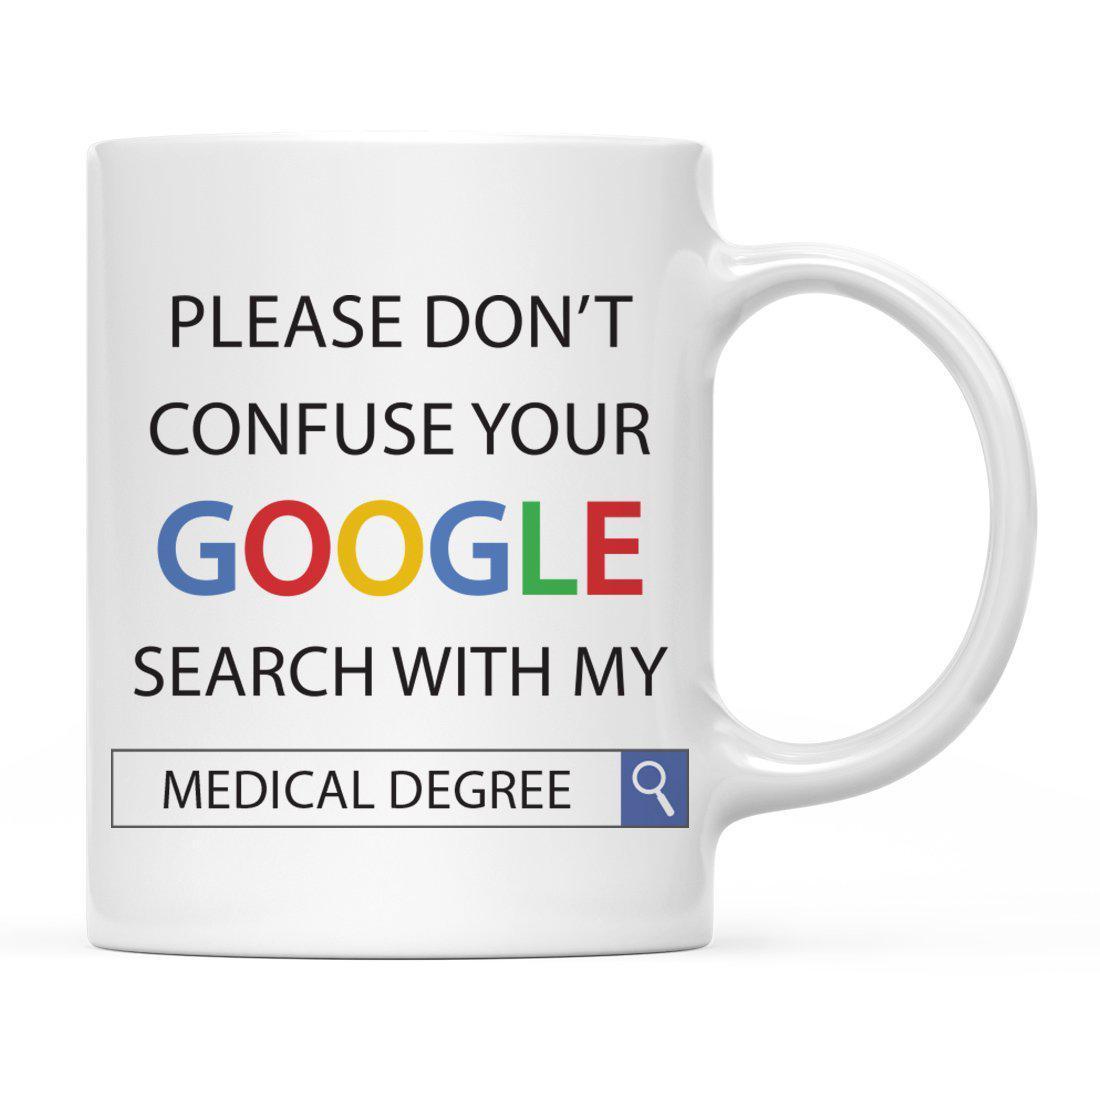 Please-Do-Not-Confuse-Your-Google-Search-with-My-Degree-Ceramic-Coffee-Mug-Set-of-1-Andaz-Press-Medical-Degree_9fe4990b-7ca7-46db-a527-107d48c2c201_1100x1100.jpg